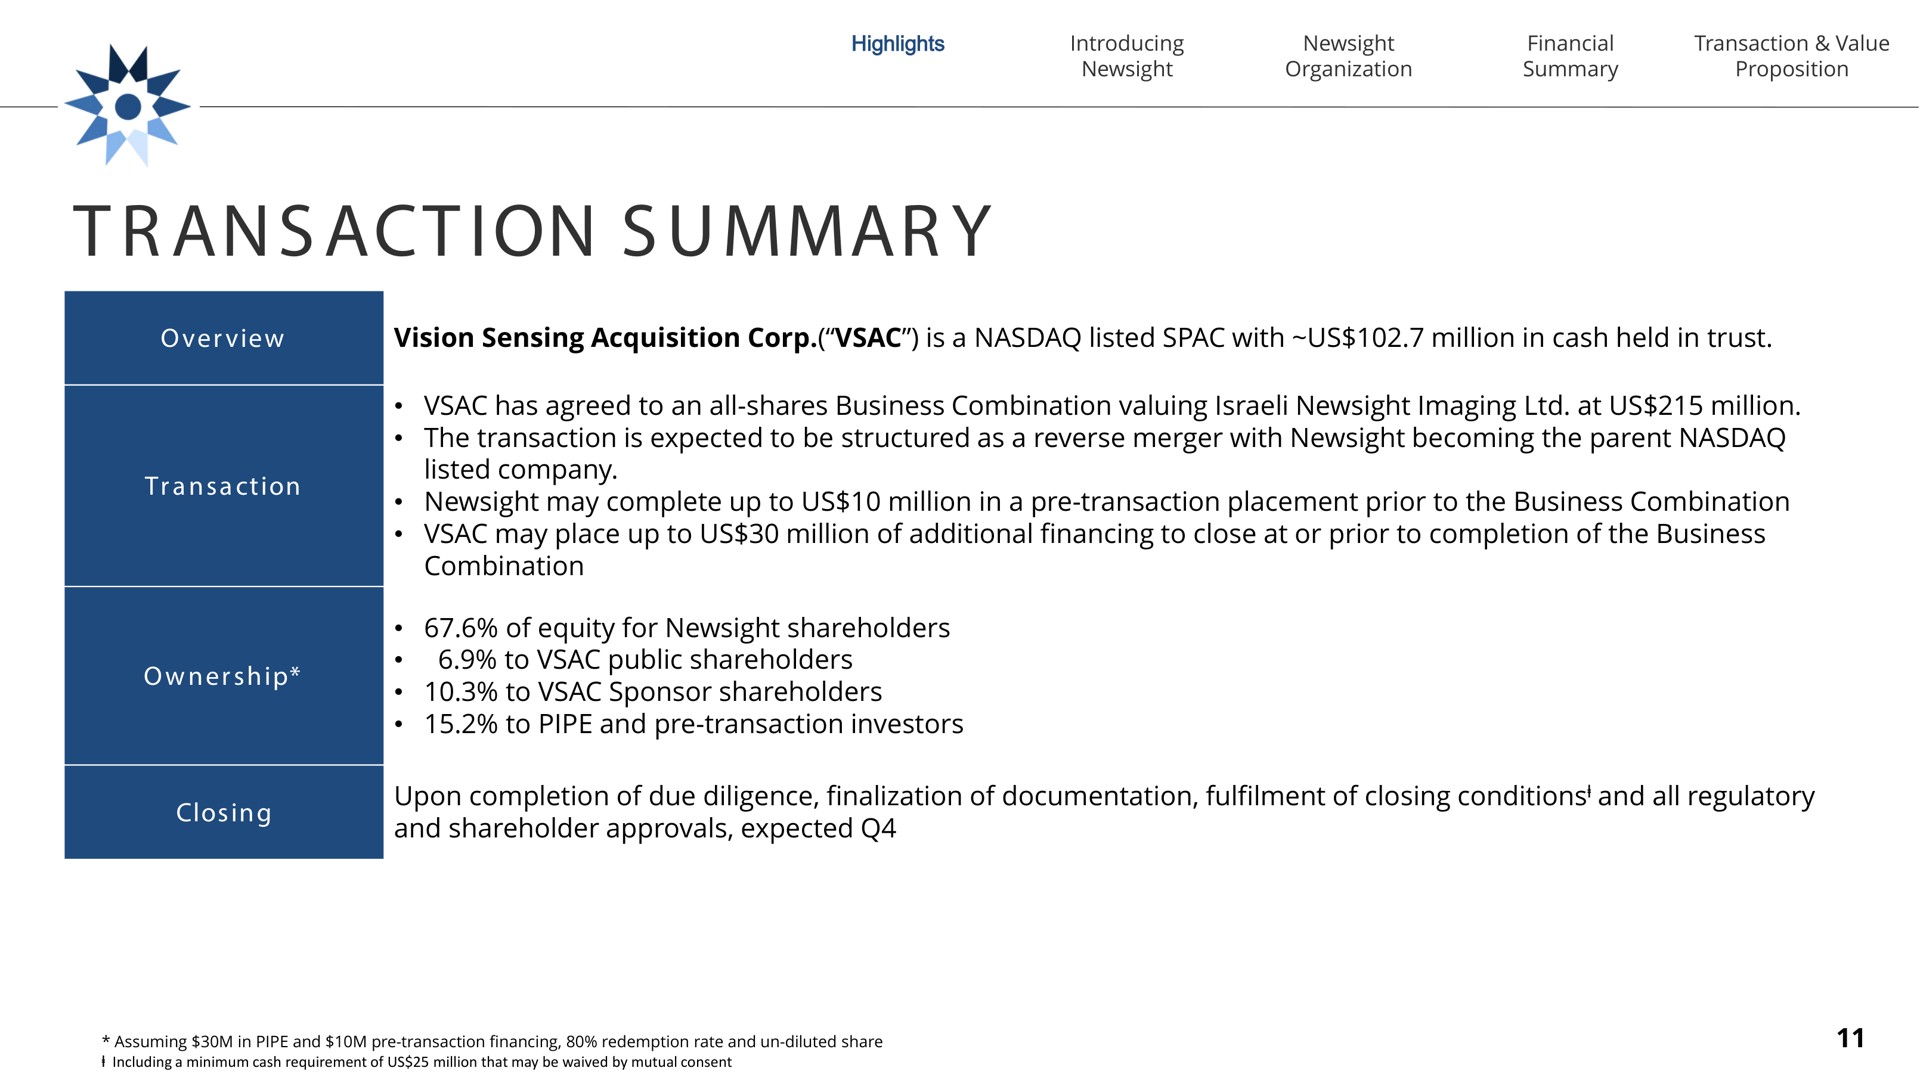 ans act ion view vision sensing acquisition corp is a listed with us million in cash held in trust a a ion has agreed to an all shares business combination valuing imaging at us million the transaction is expected to be structured as a reverse merger with becoming the parent listed company may complete up to us million in a transaction placement prior to the business combination may place up to us million of additional financing to close at or prior to completion of the business combination of equity for shareholders to public shareholders to sponsor shareholders to pipe and transaction investors in upon completion of due diligence of documentation of closing conditions and all regulatory and shareholder approvals expected summary overview ownership | Newsight Imaging